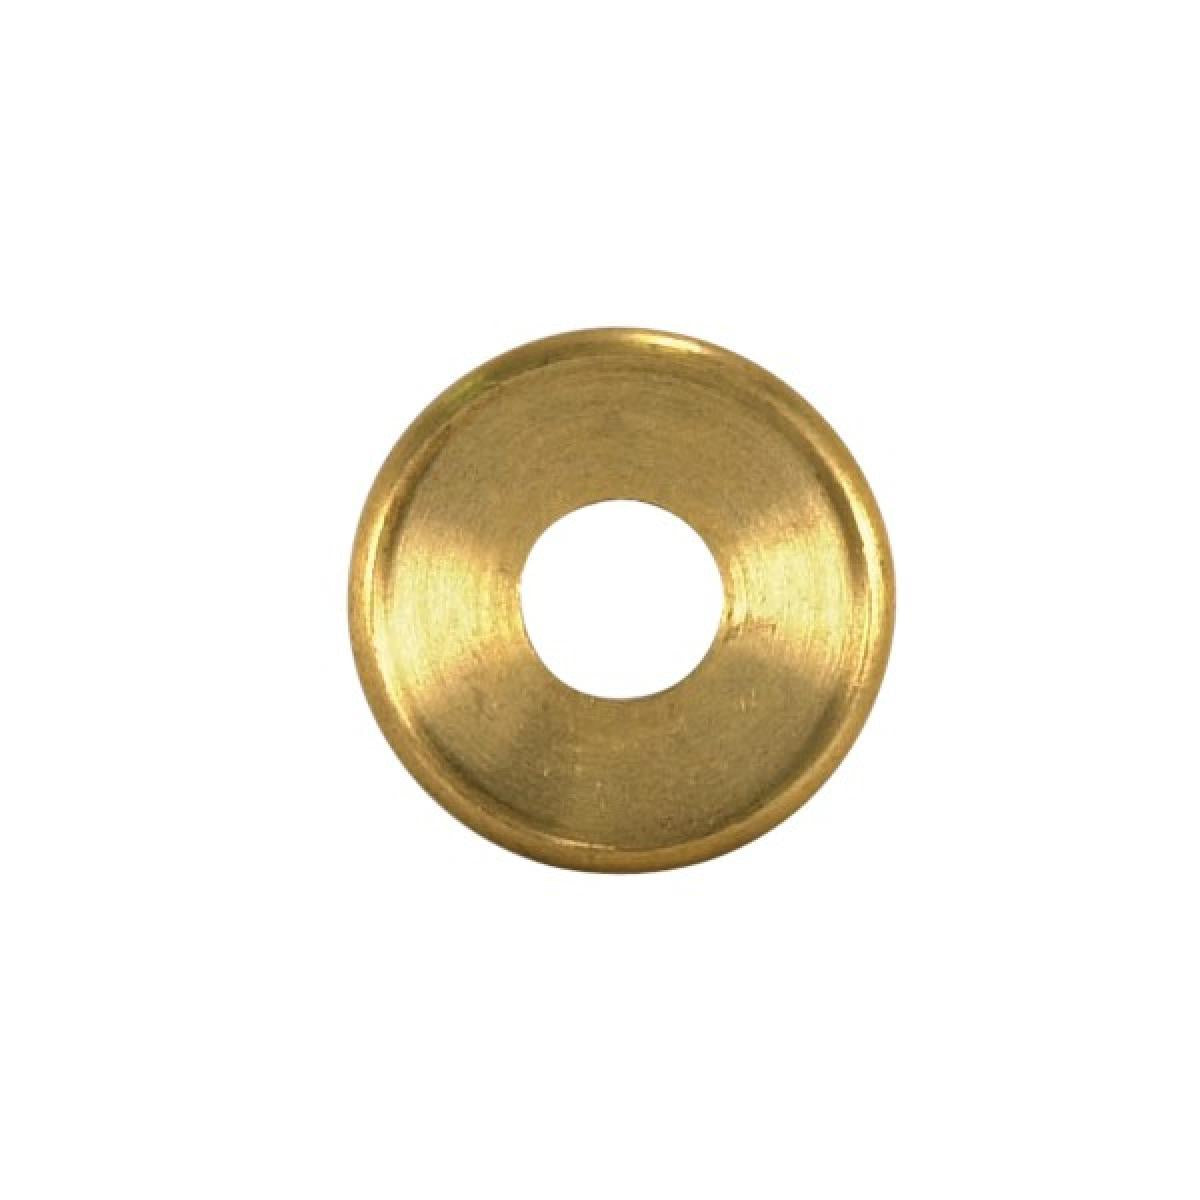 Satco 90-1599 Turned Brass Check Ring 1/8 IP Slip Unfinished 1-1/2" Diameter